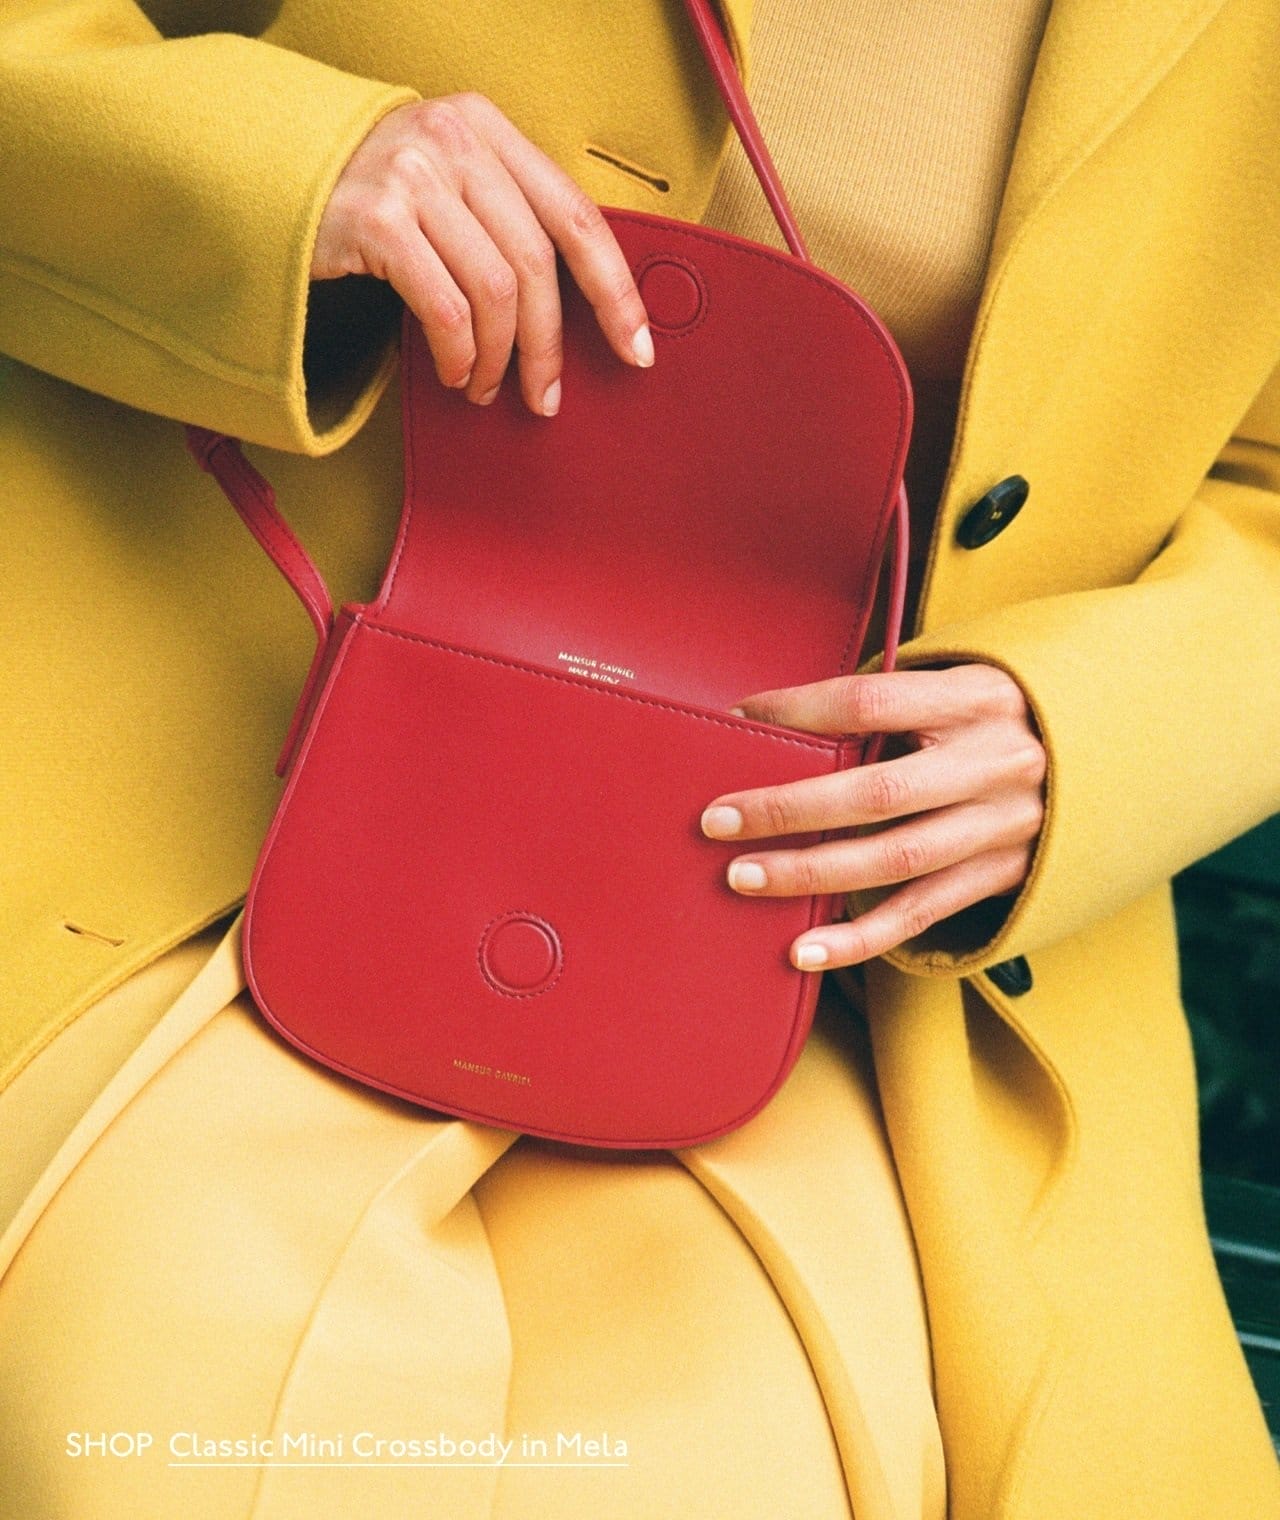 Shop new crossbodies. Pictured: the Vegan Apple Mini Crossbody in Mela, a bright red hue.